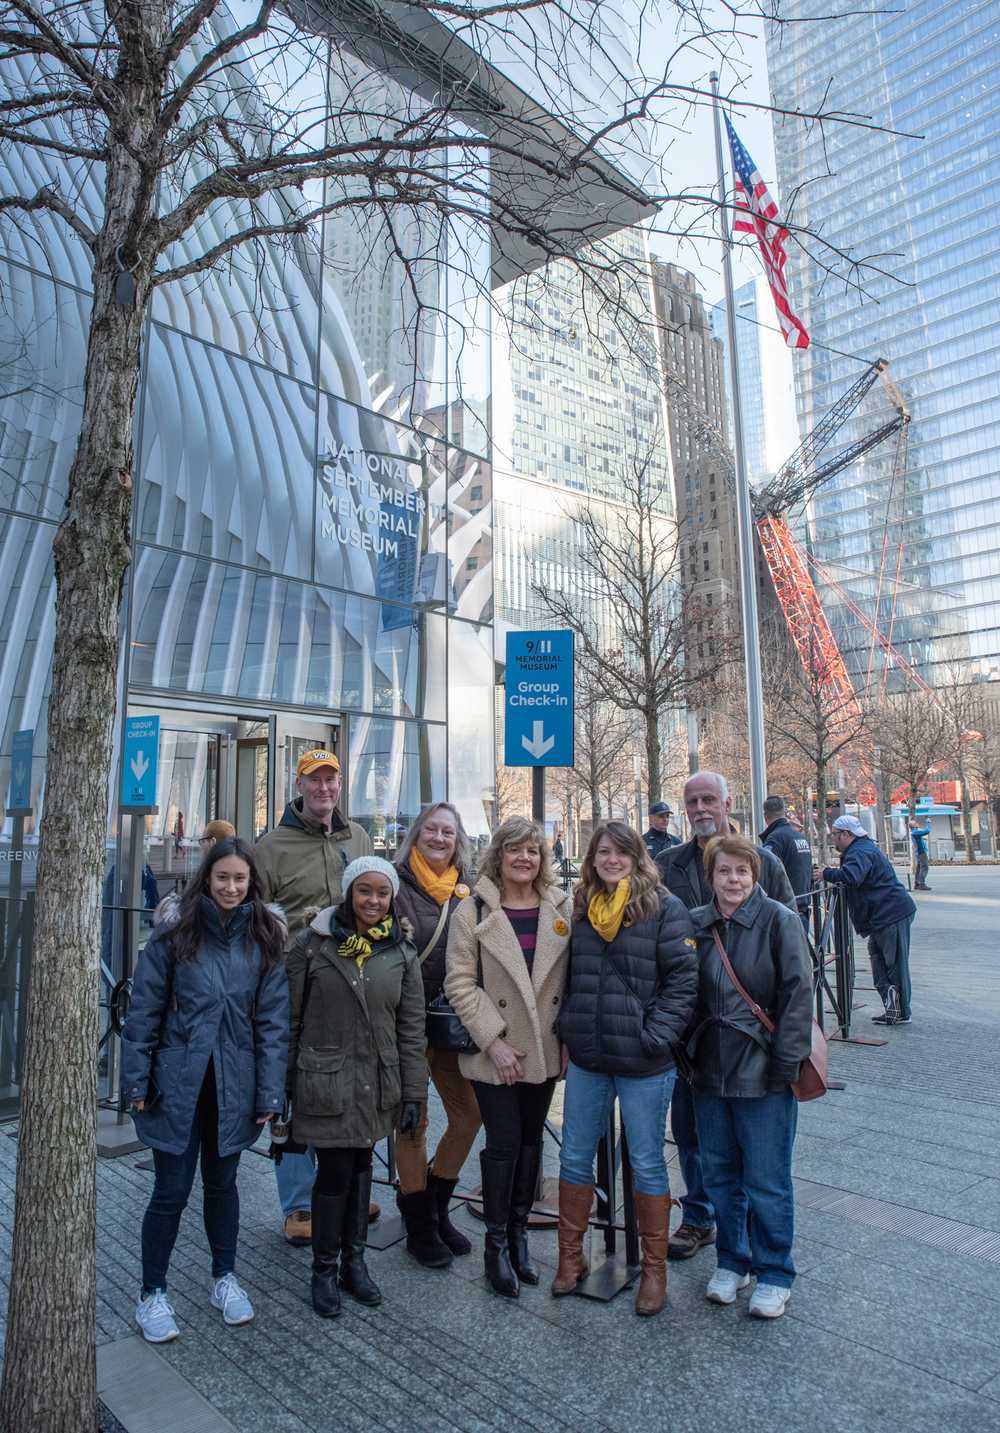 A group of people stands for a photo on the streets of New York.